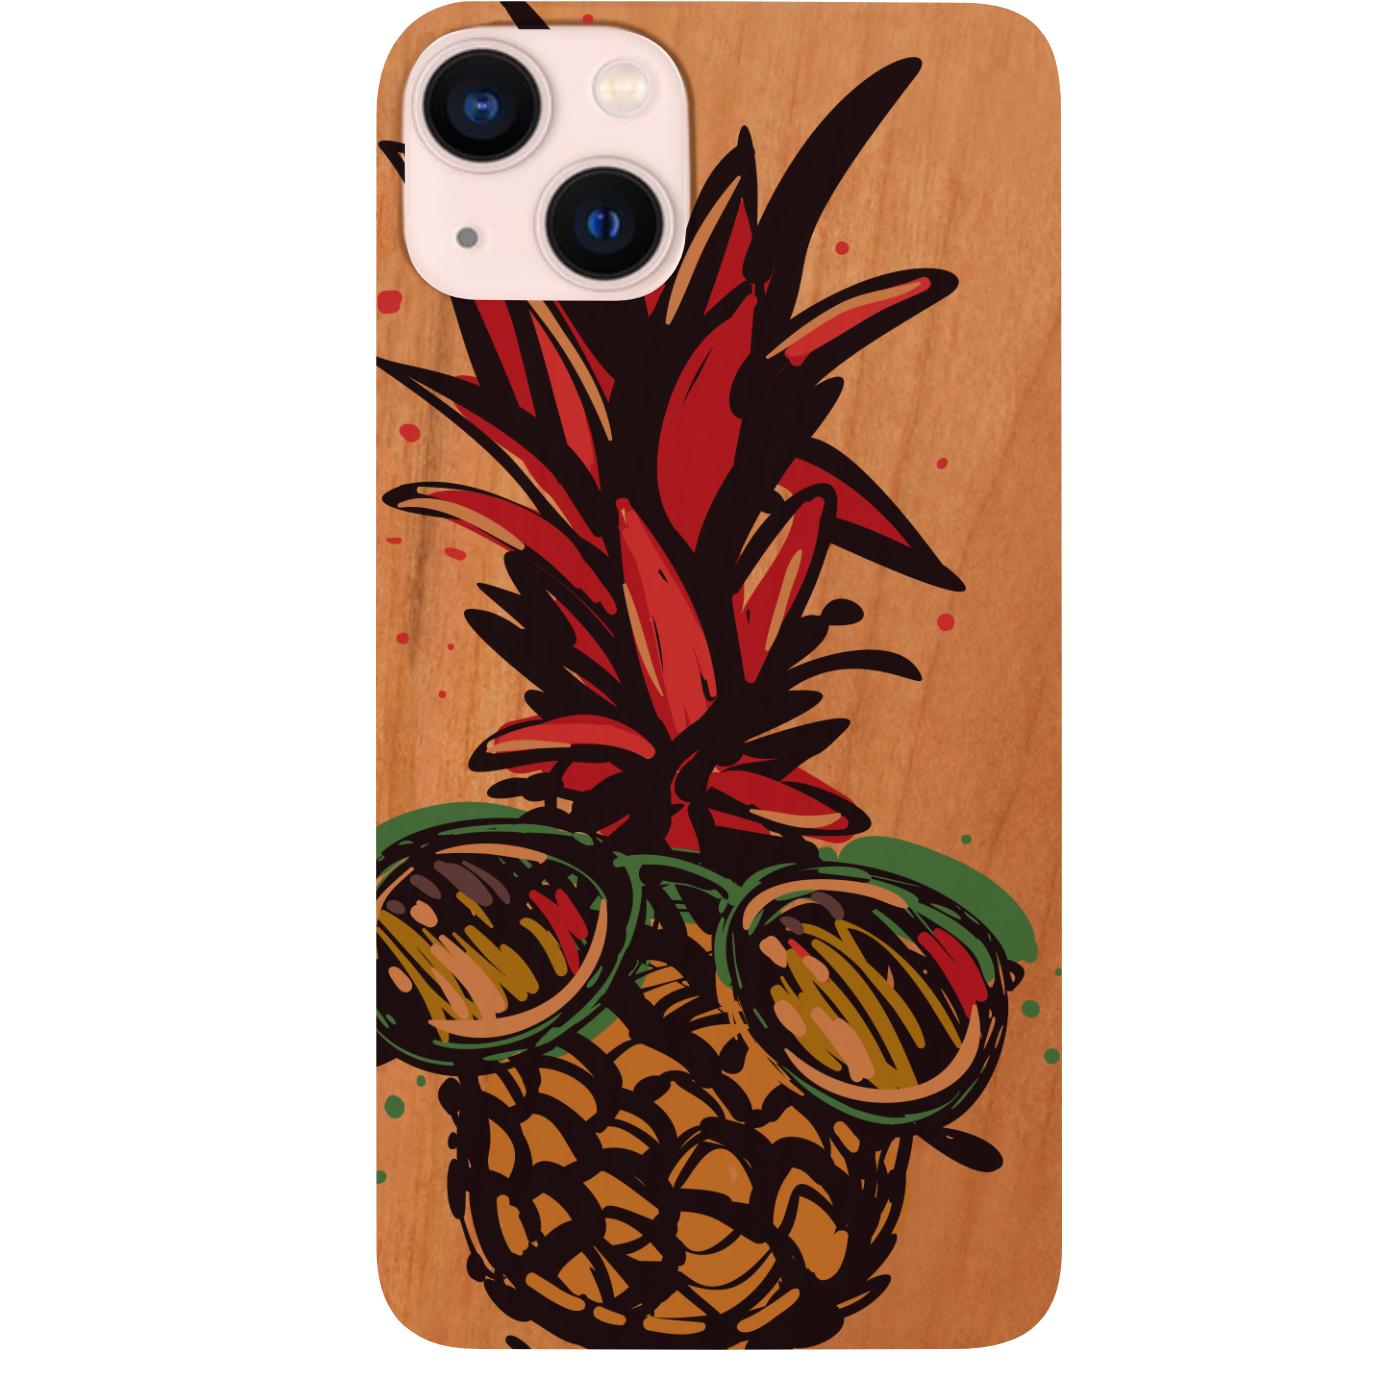 Pinneapple with Sunglasses - UV Color Printed Phone Case